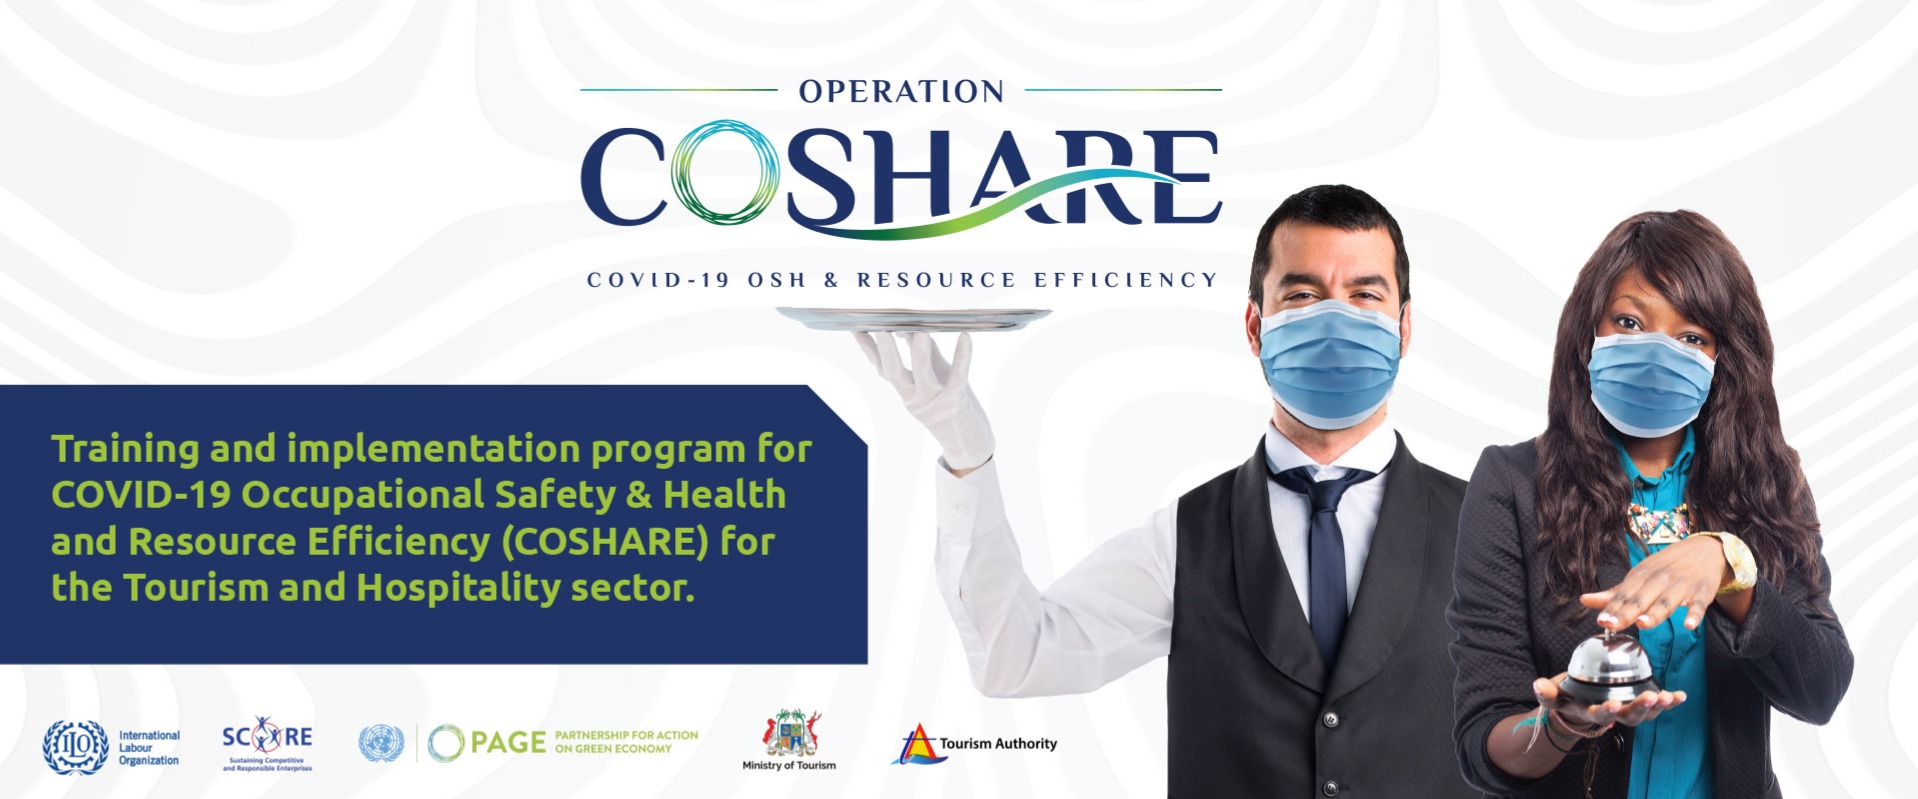 Learn more about Operation COSHARE here